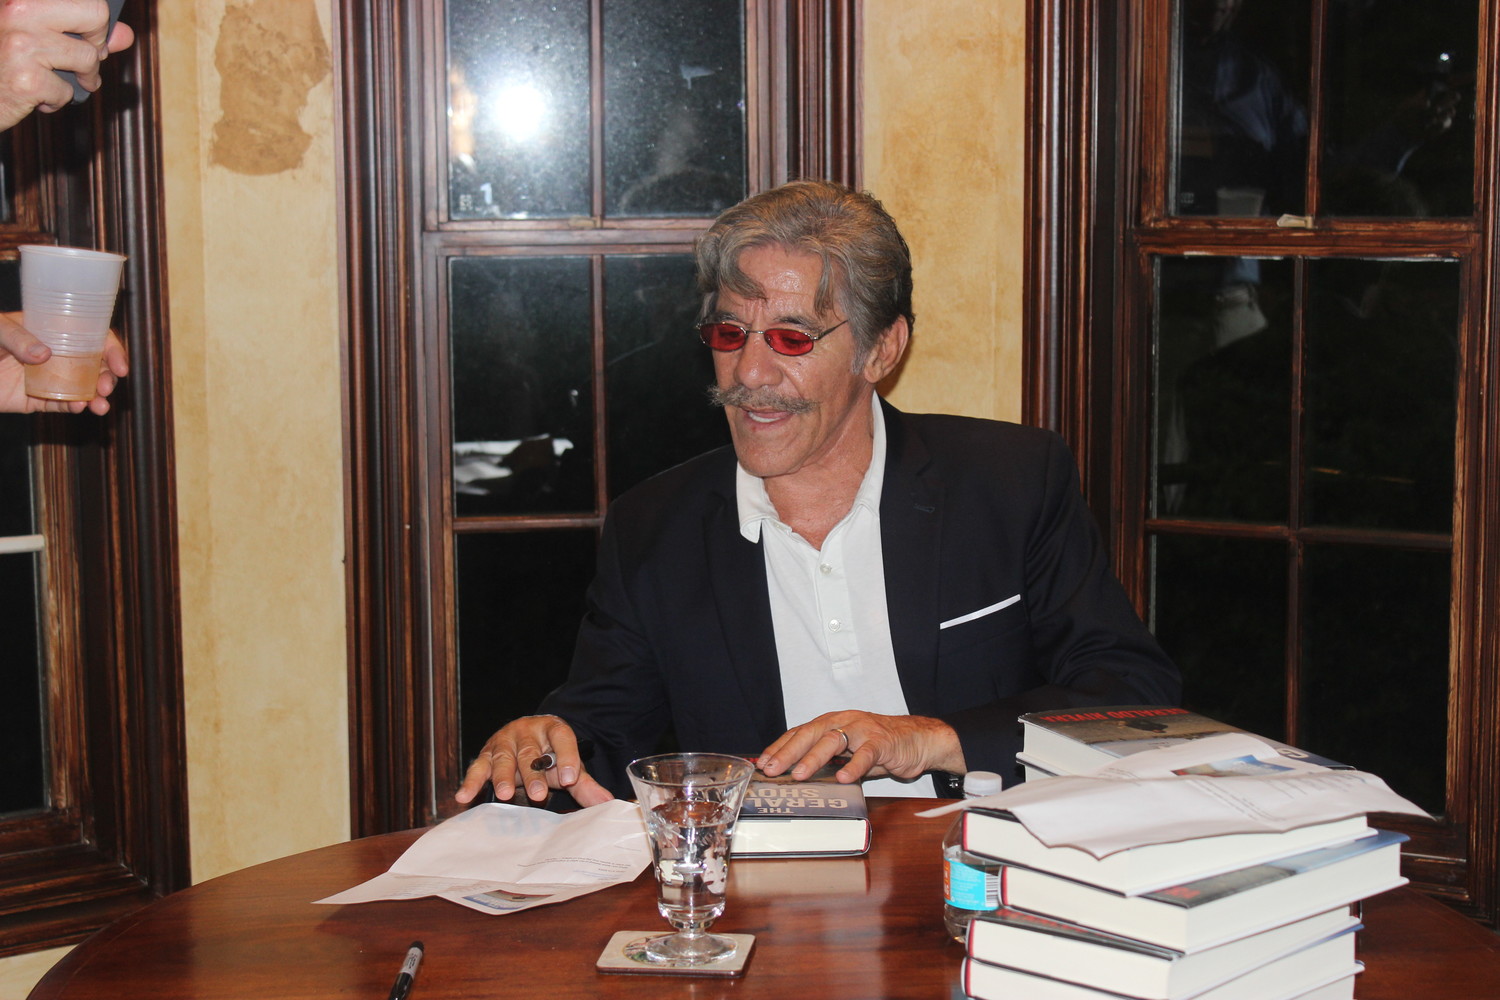 Longtime journalist Geraldo Rivera signs copies of his new book, “The Geraldo Show: A Memoir,” at a private event hosted by Janet and Dale Westling at their house in Sawgrass Country Club on June 2.